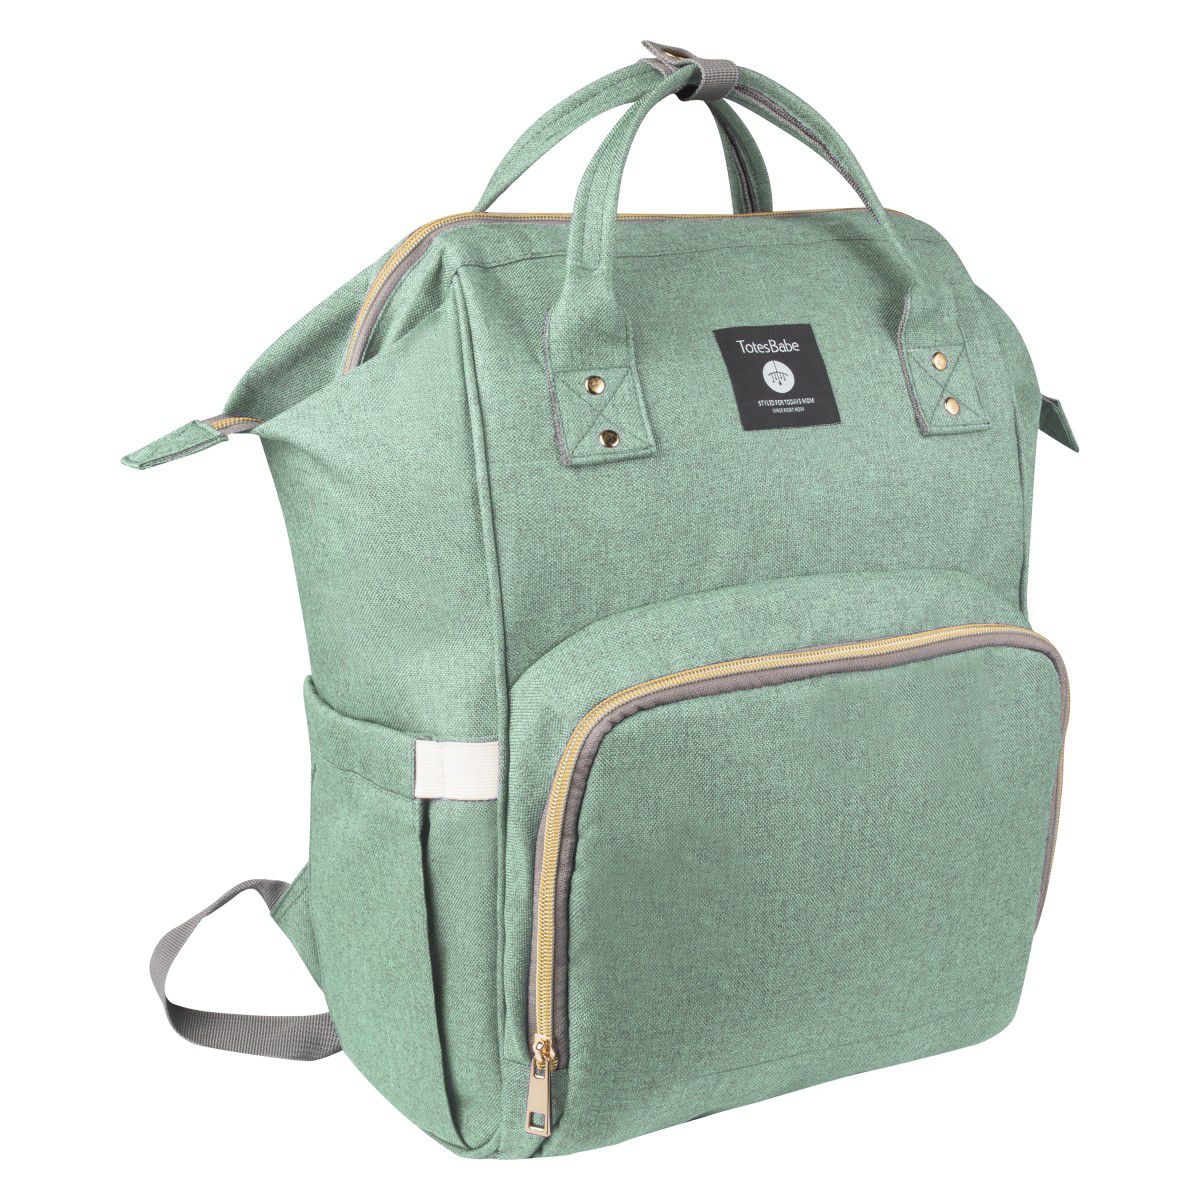 Totes Babe Alma 18L Diaper Backpack - Mint